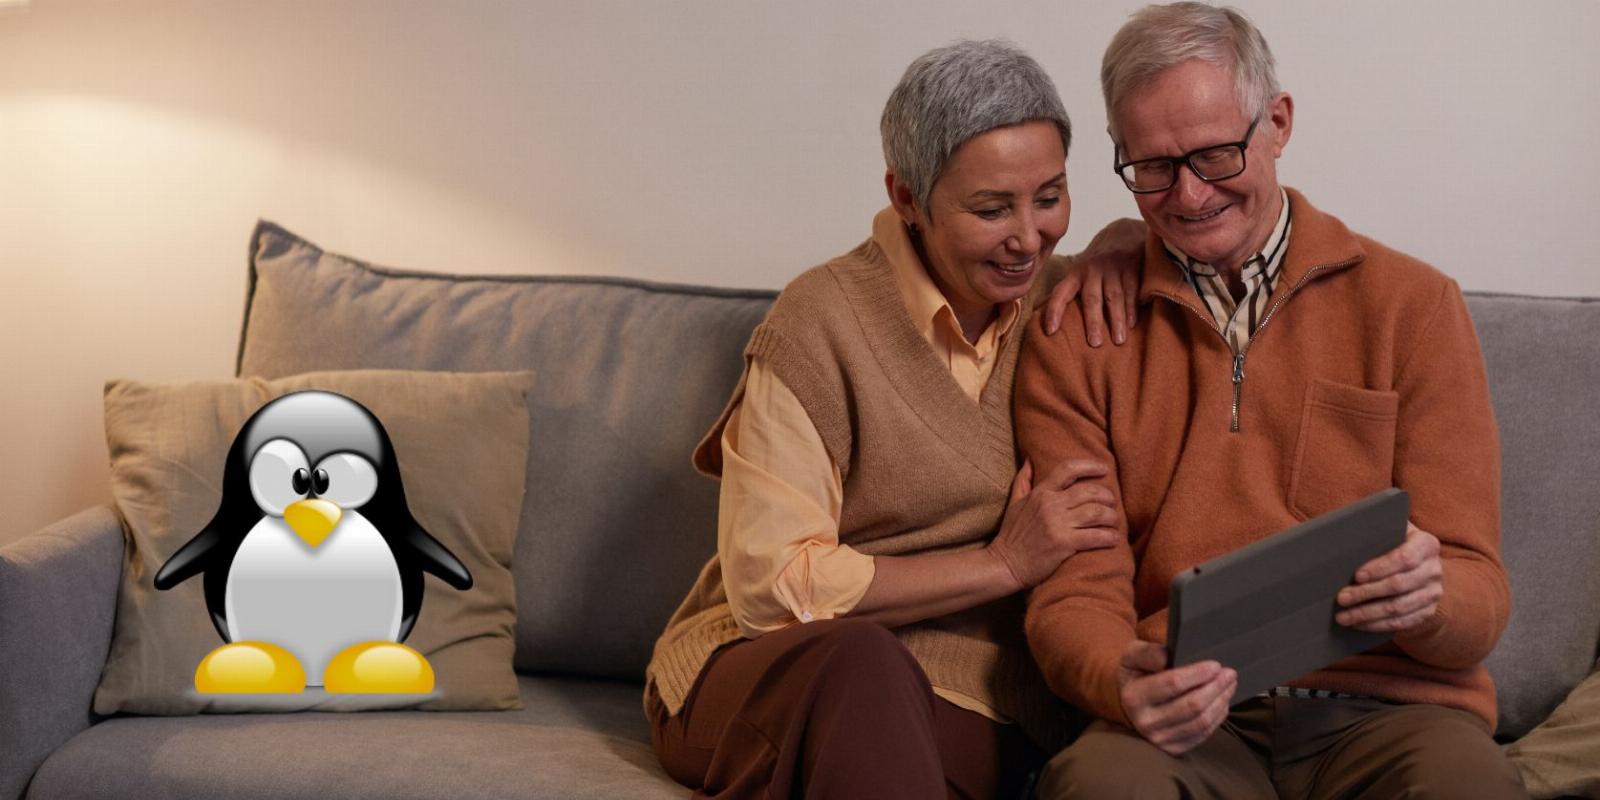 8 Reasons Why Linux Is Perfect for Older People